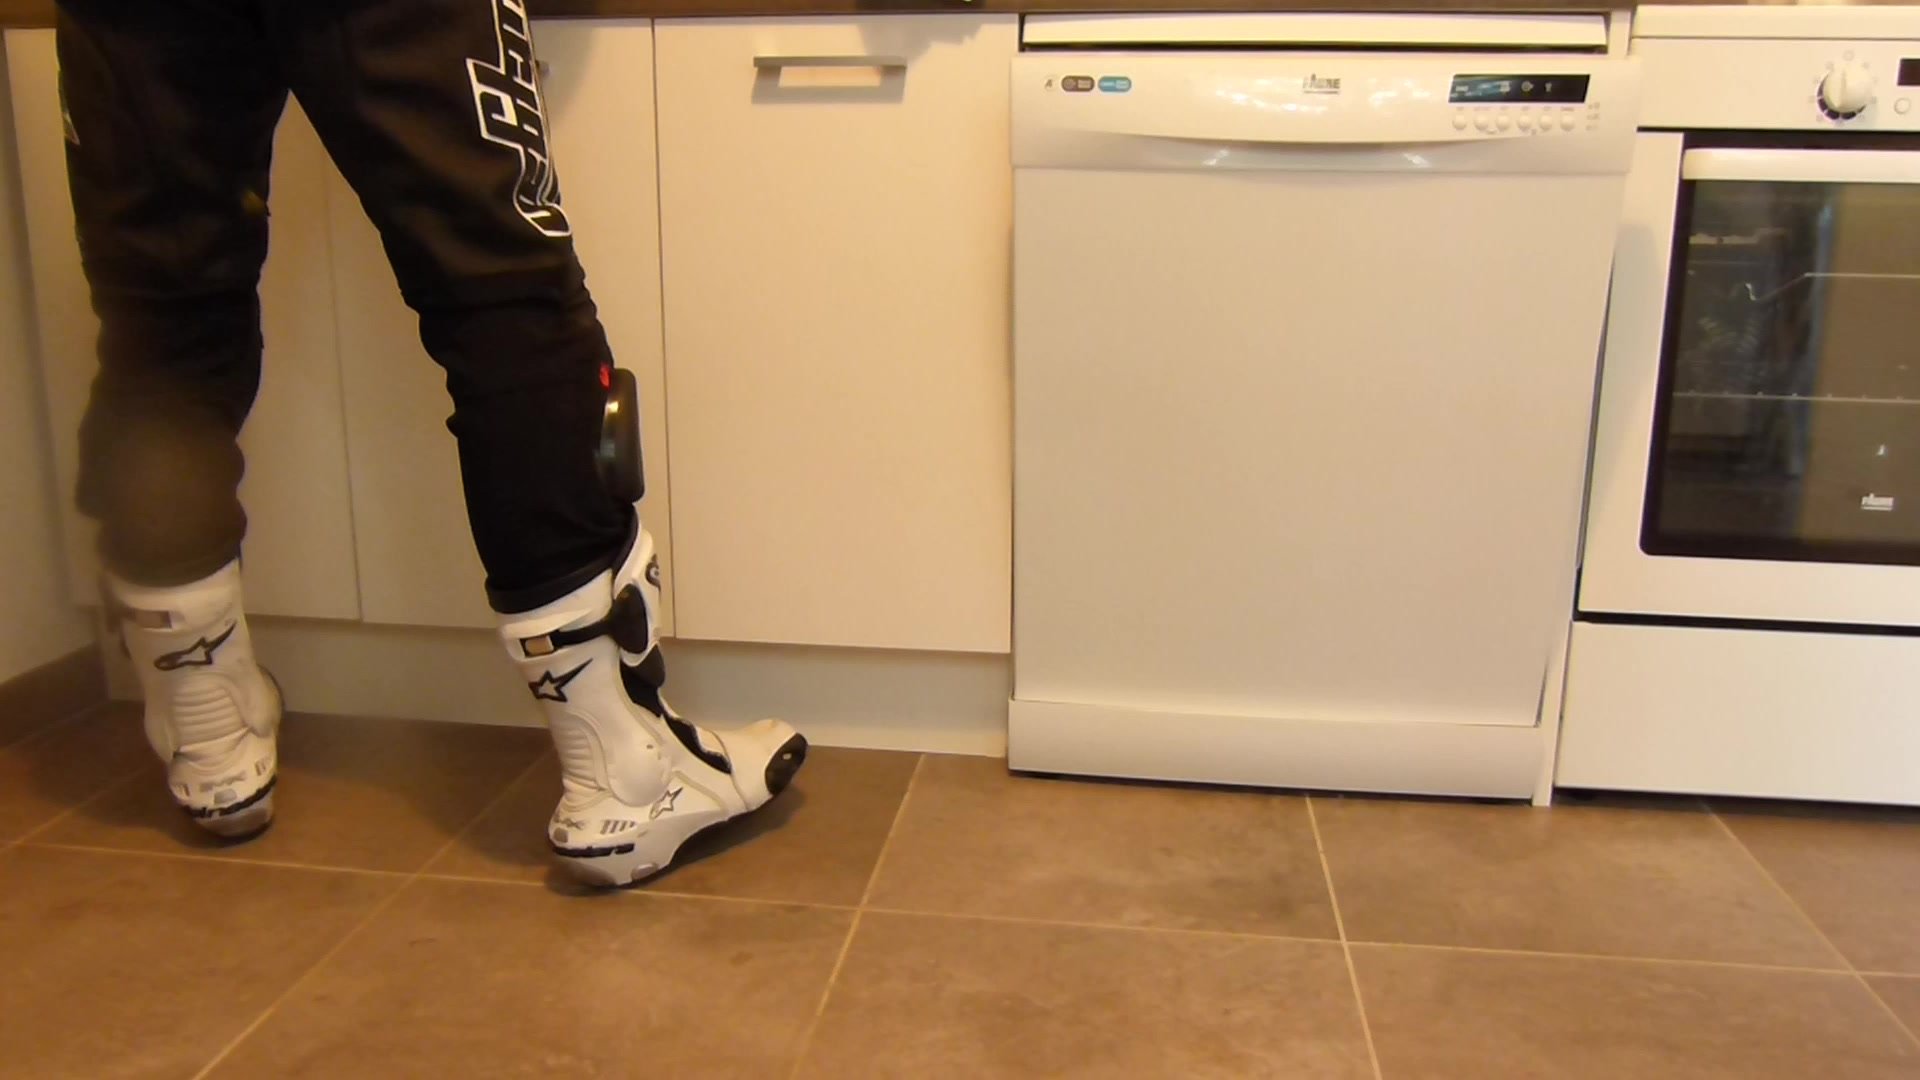 Doing cooking in bike leathers + boots